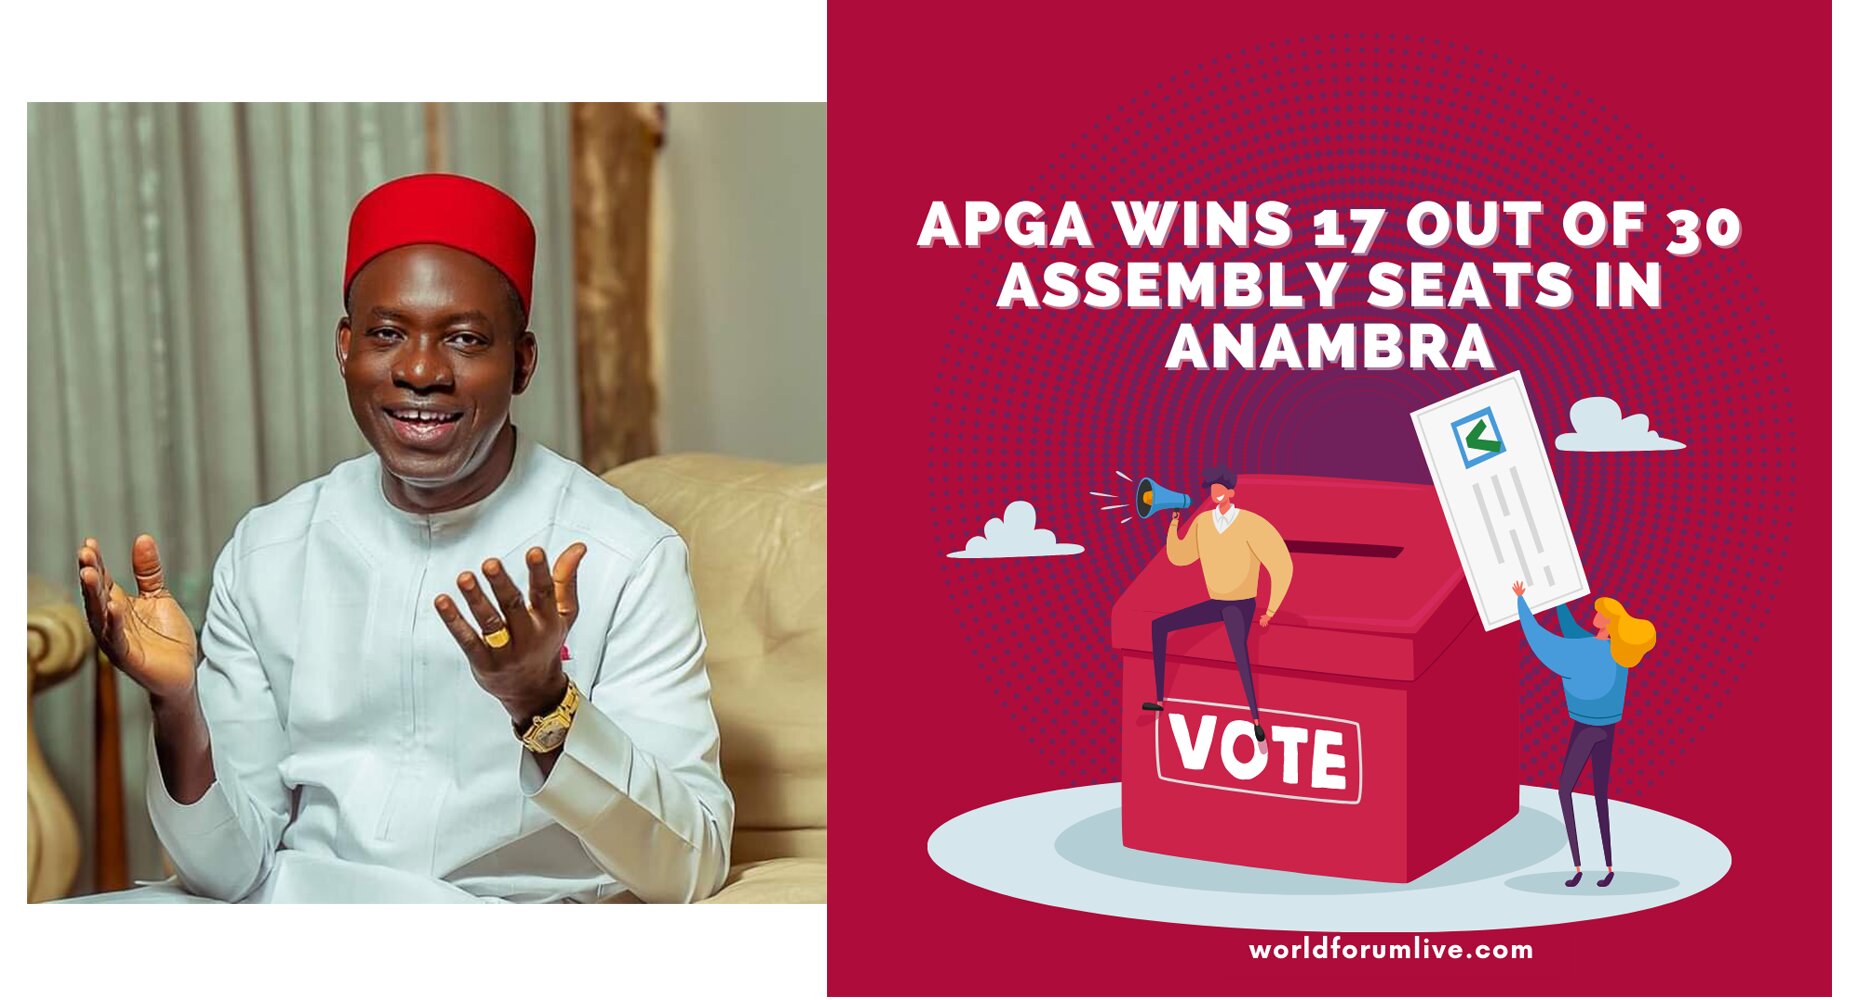 APGA-Wins-17-Out-Of-30-Assembly-Seats-In-Anambra.jpg